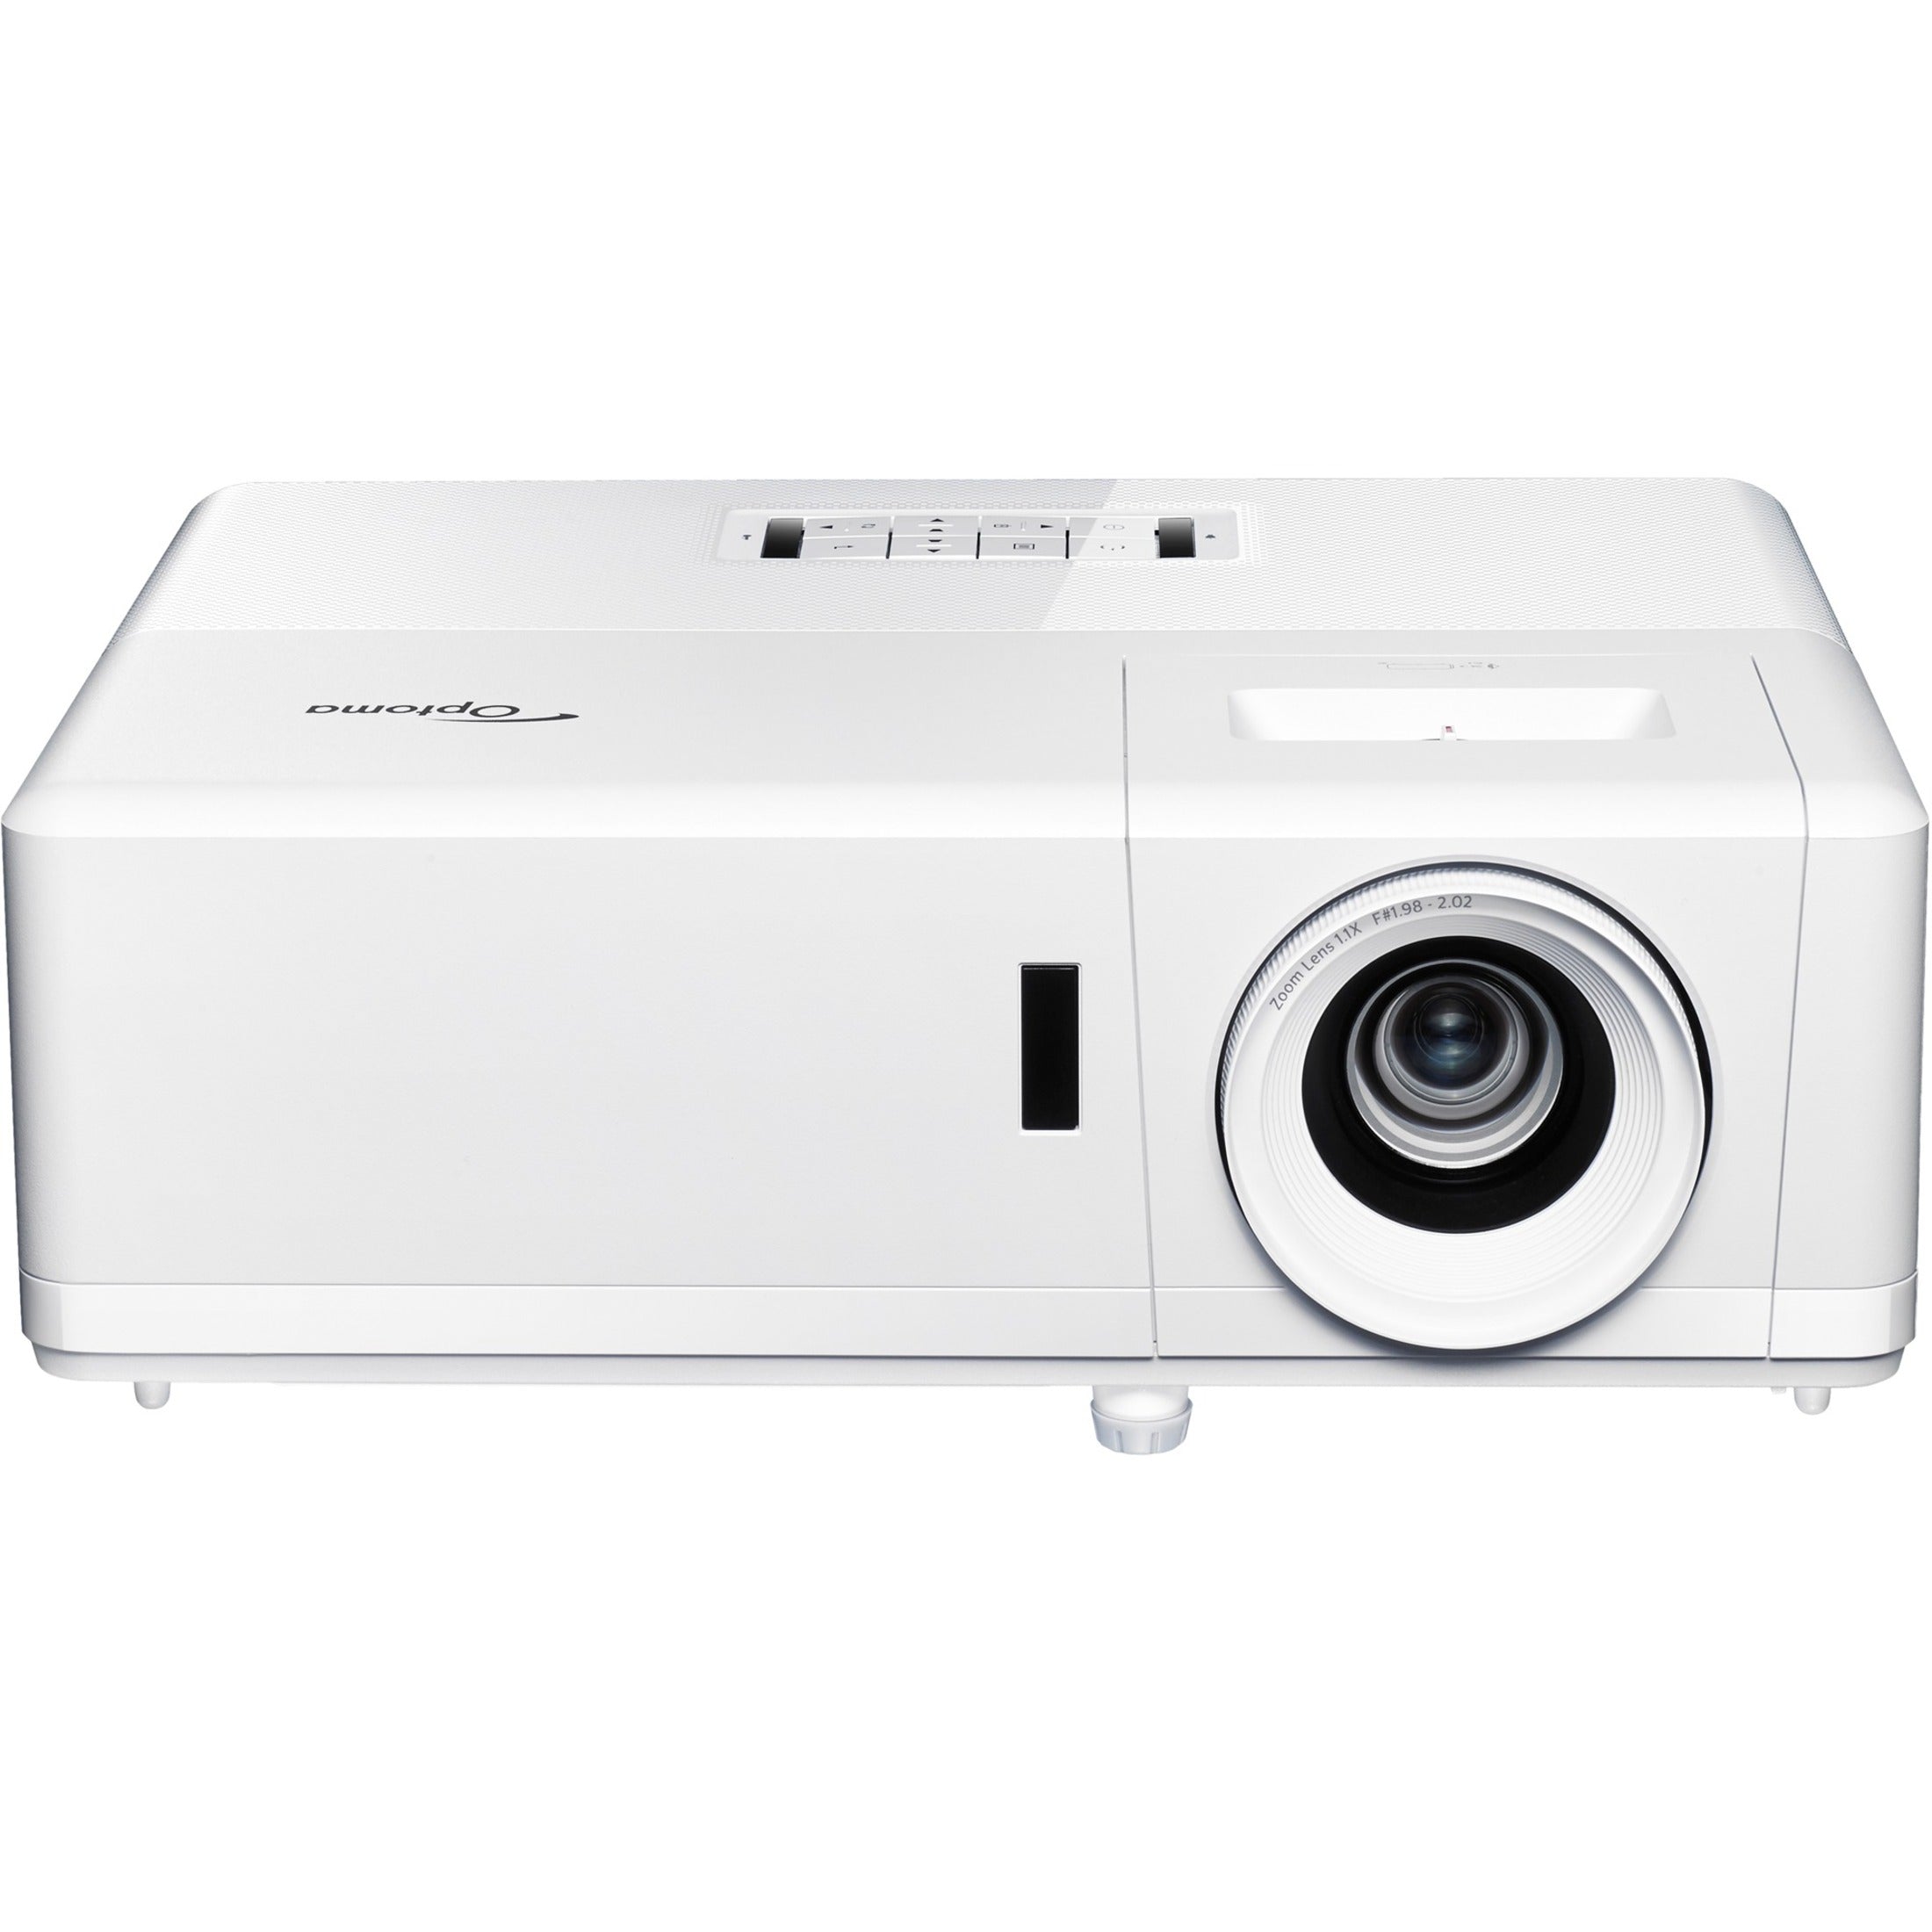 Optoma UHZ45 3D DLP Projector - 4K UHD, 3800 lm, Laser Lamp, Ceiling Mountable [Discontinued]